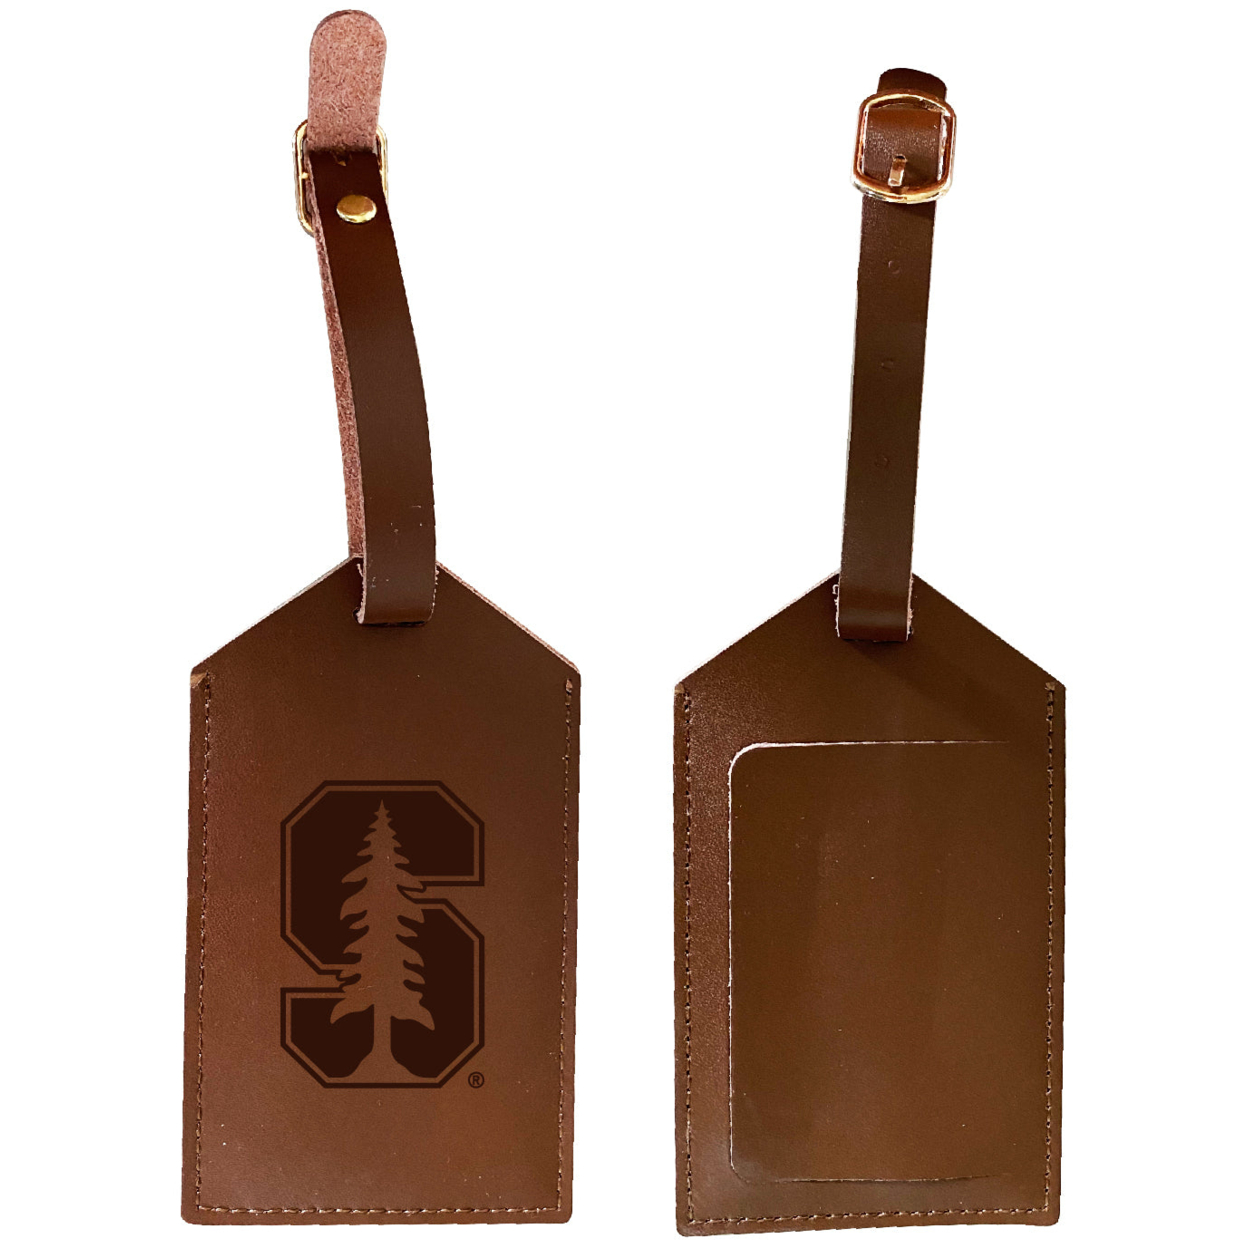 Stanford University Leather Luggage Tag Engraved